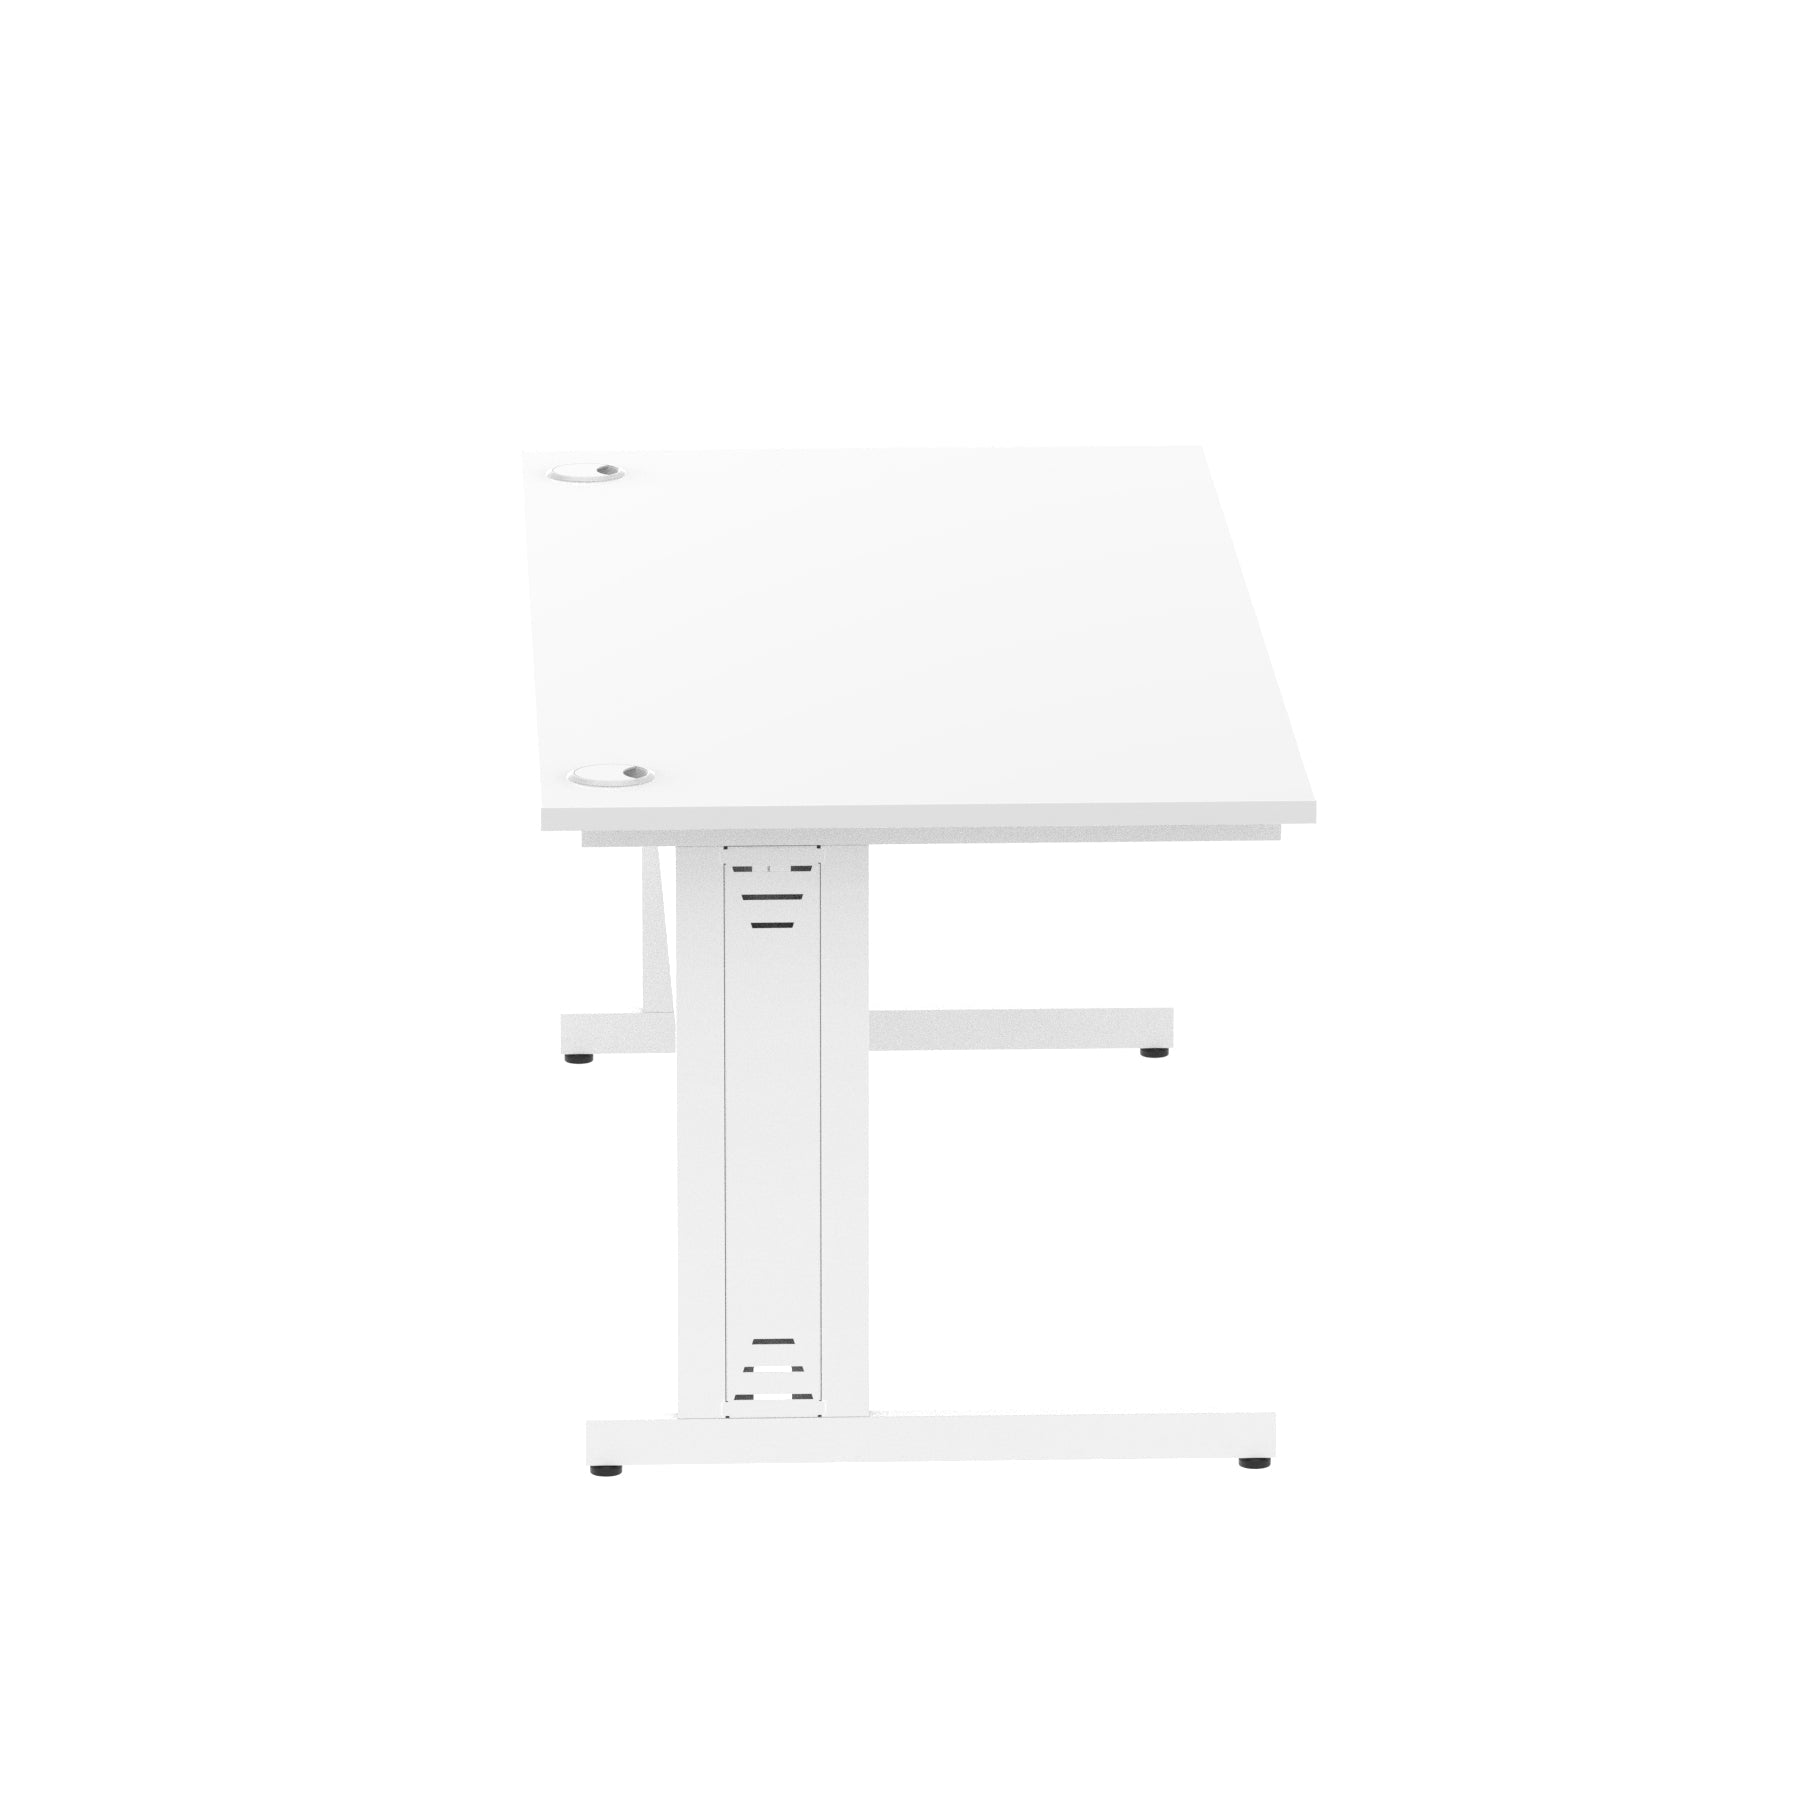 Impulse 1800mm Straight Desk with Cable Managed Leg - MFC Rectangular Table, Self-Assembly, 5-Year Guarantee, Silver/White Frame (1800x800x730mm)